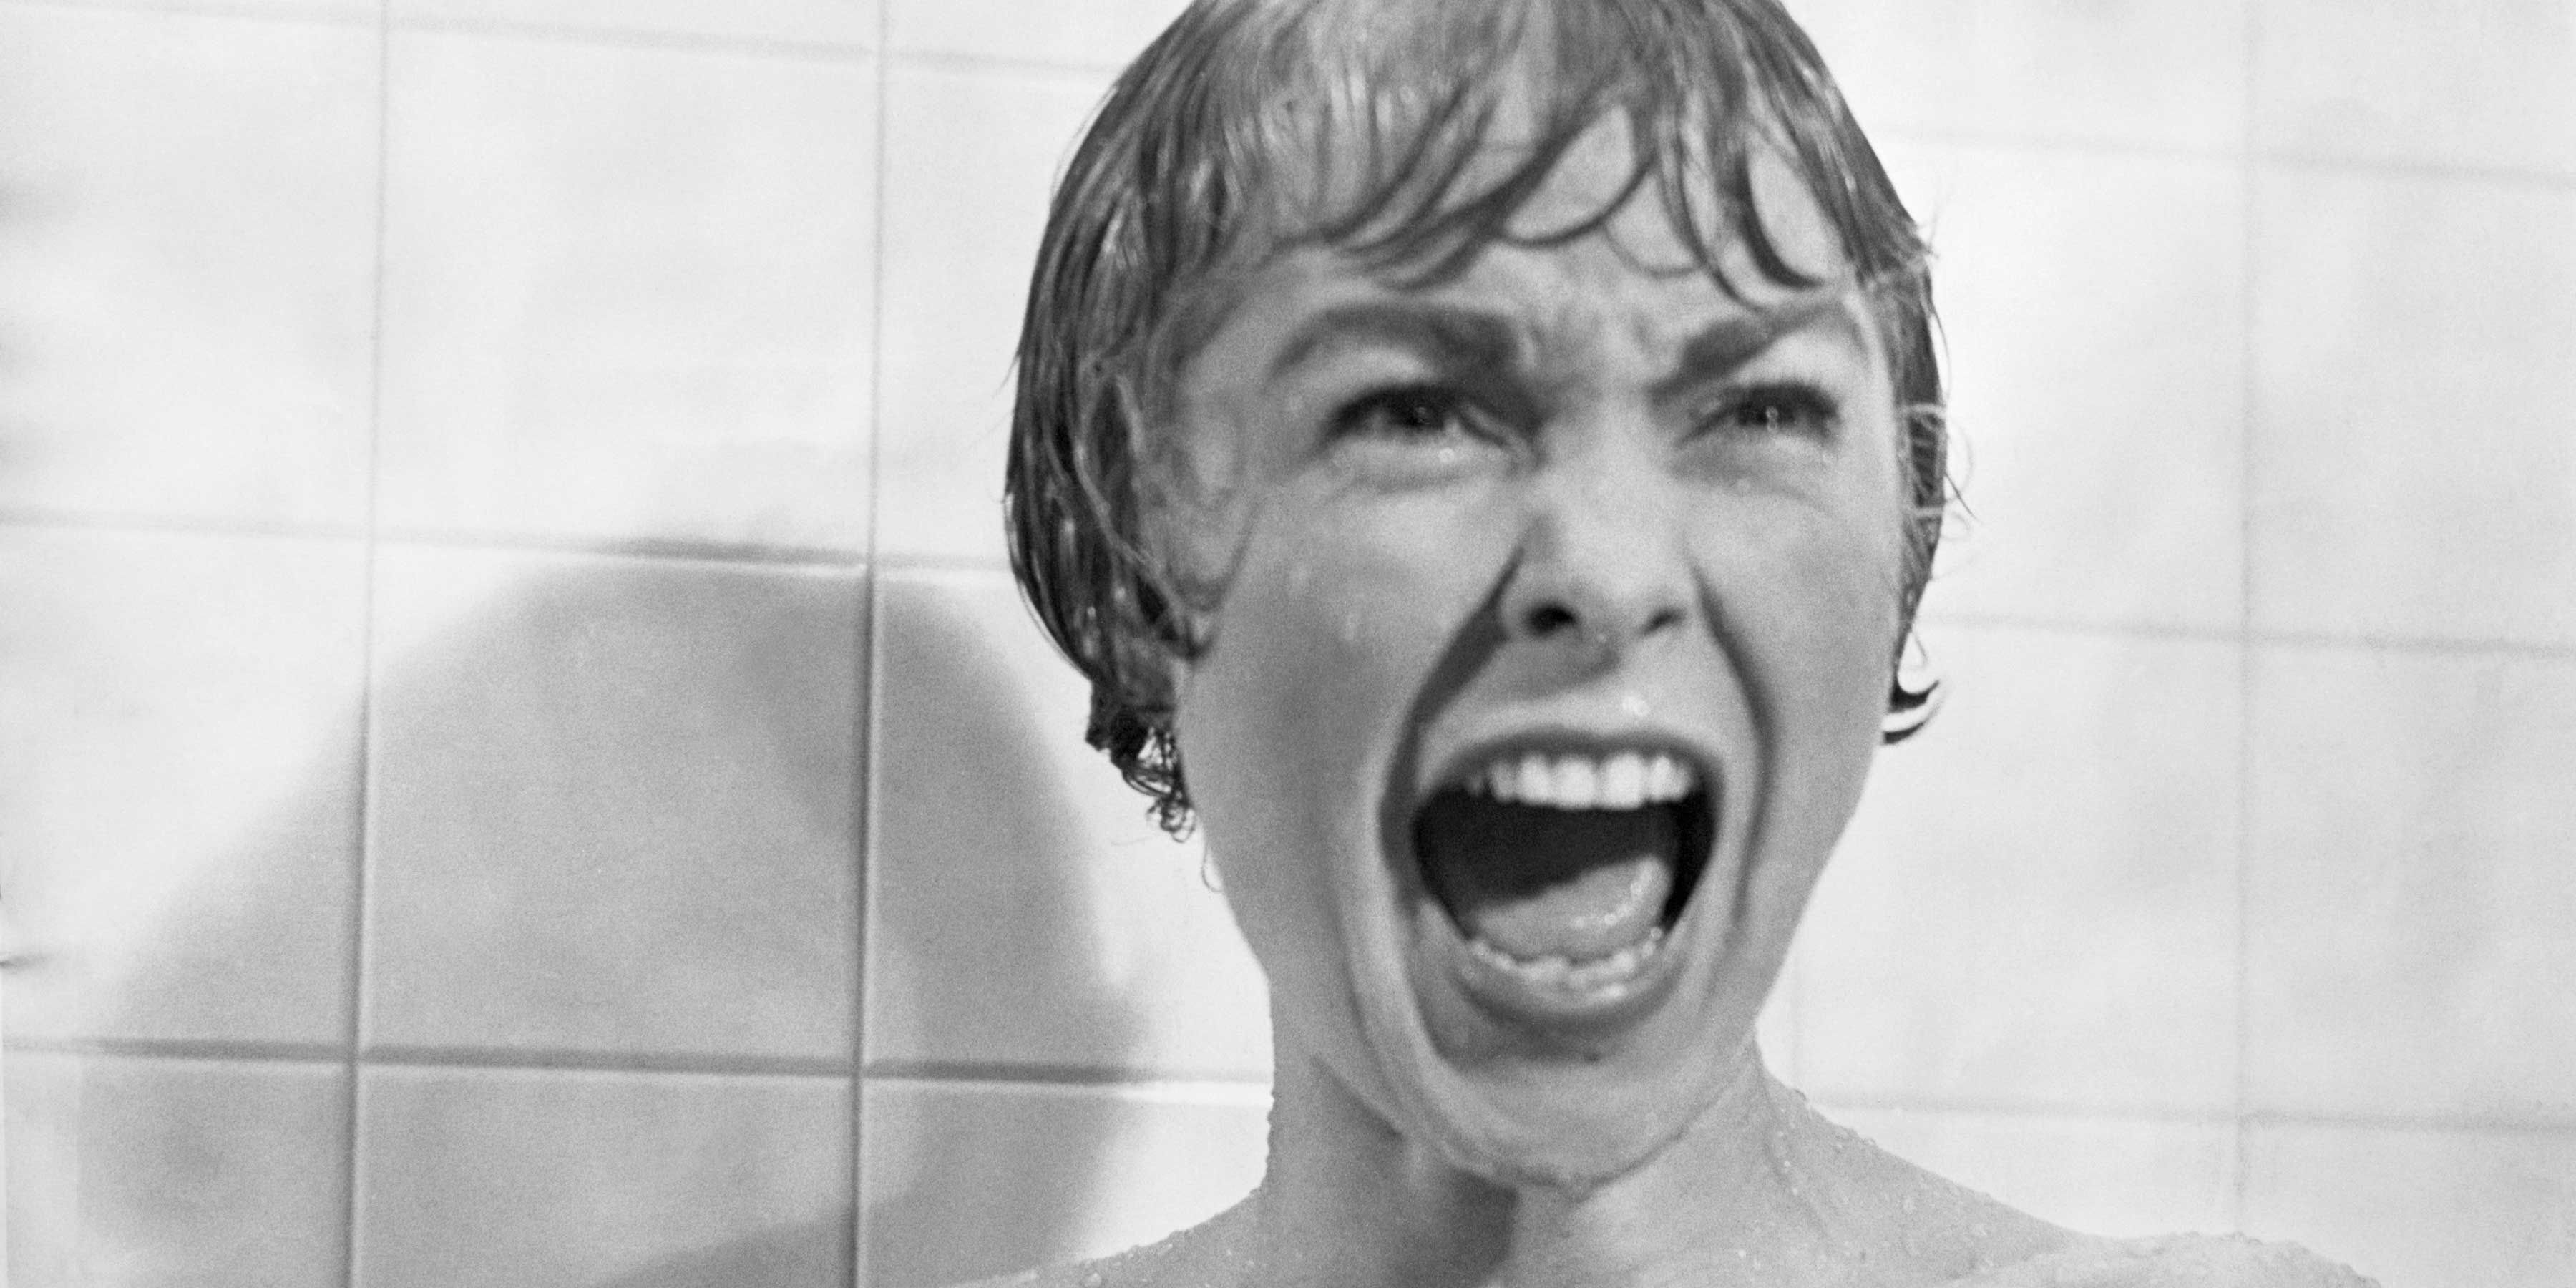 Psycho 5 Ways Its The Greatest Thriller Ever Made (& Its 5 Closest Contenders)